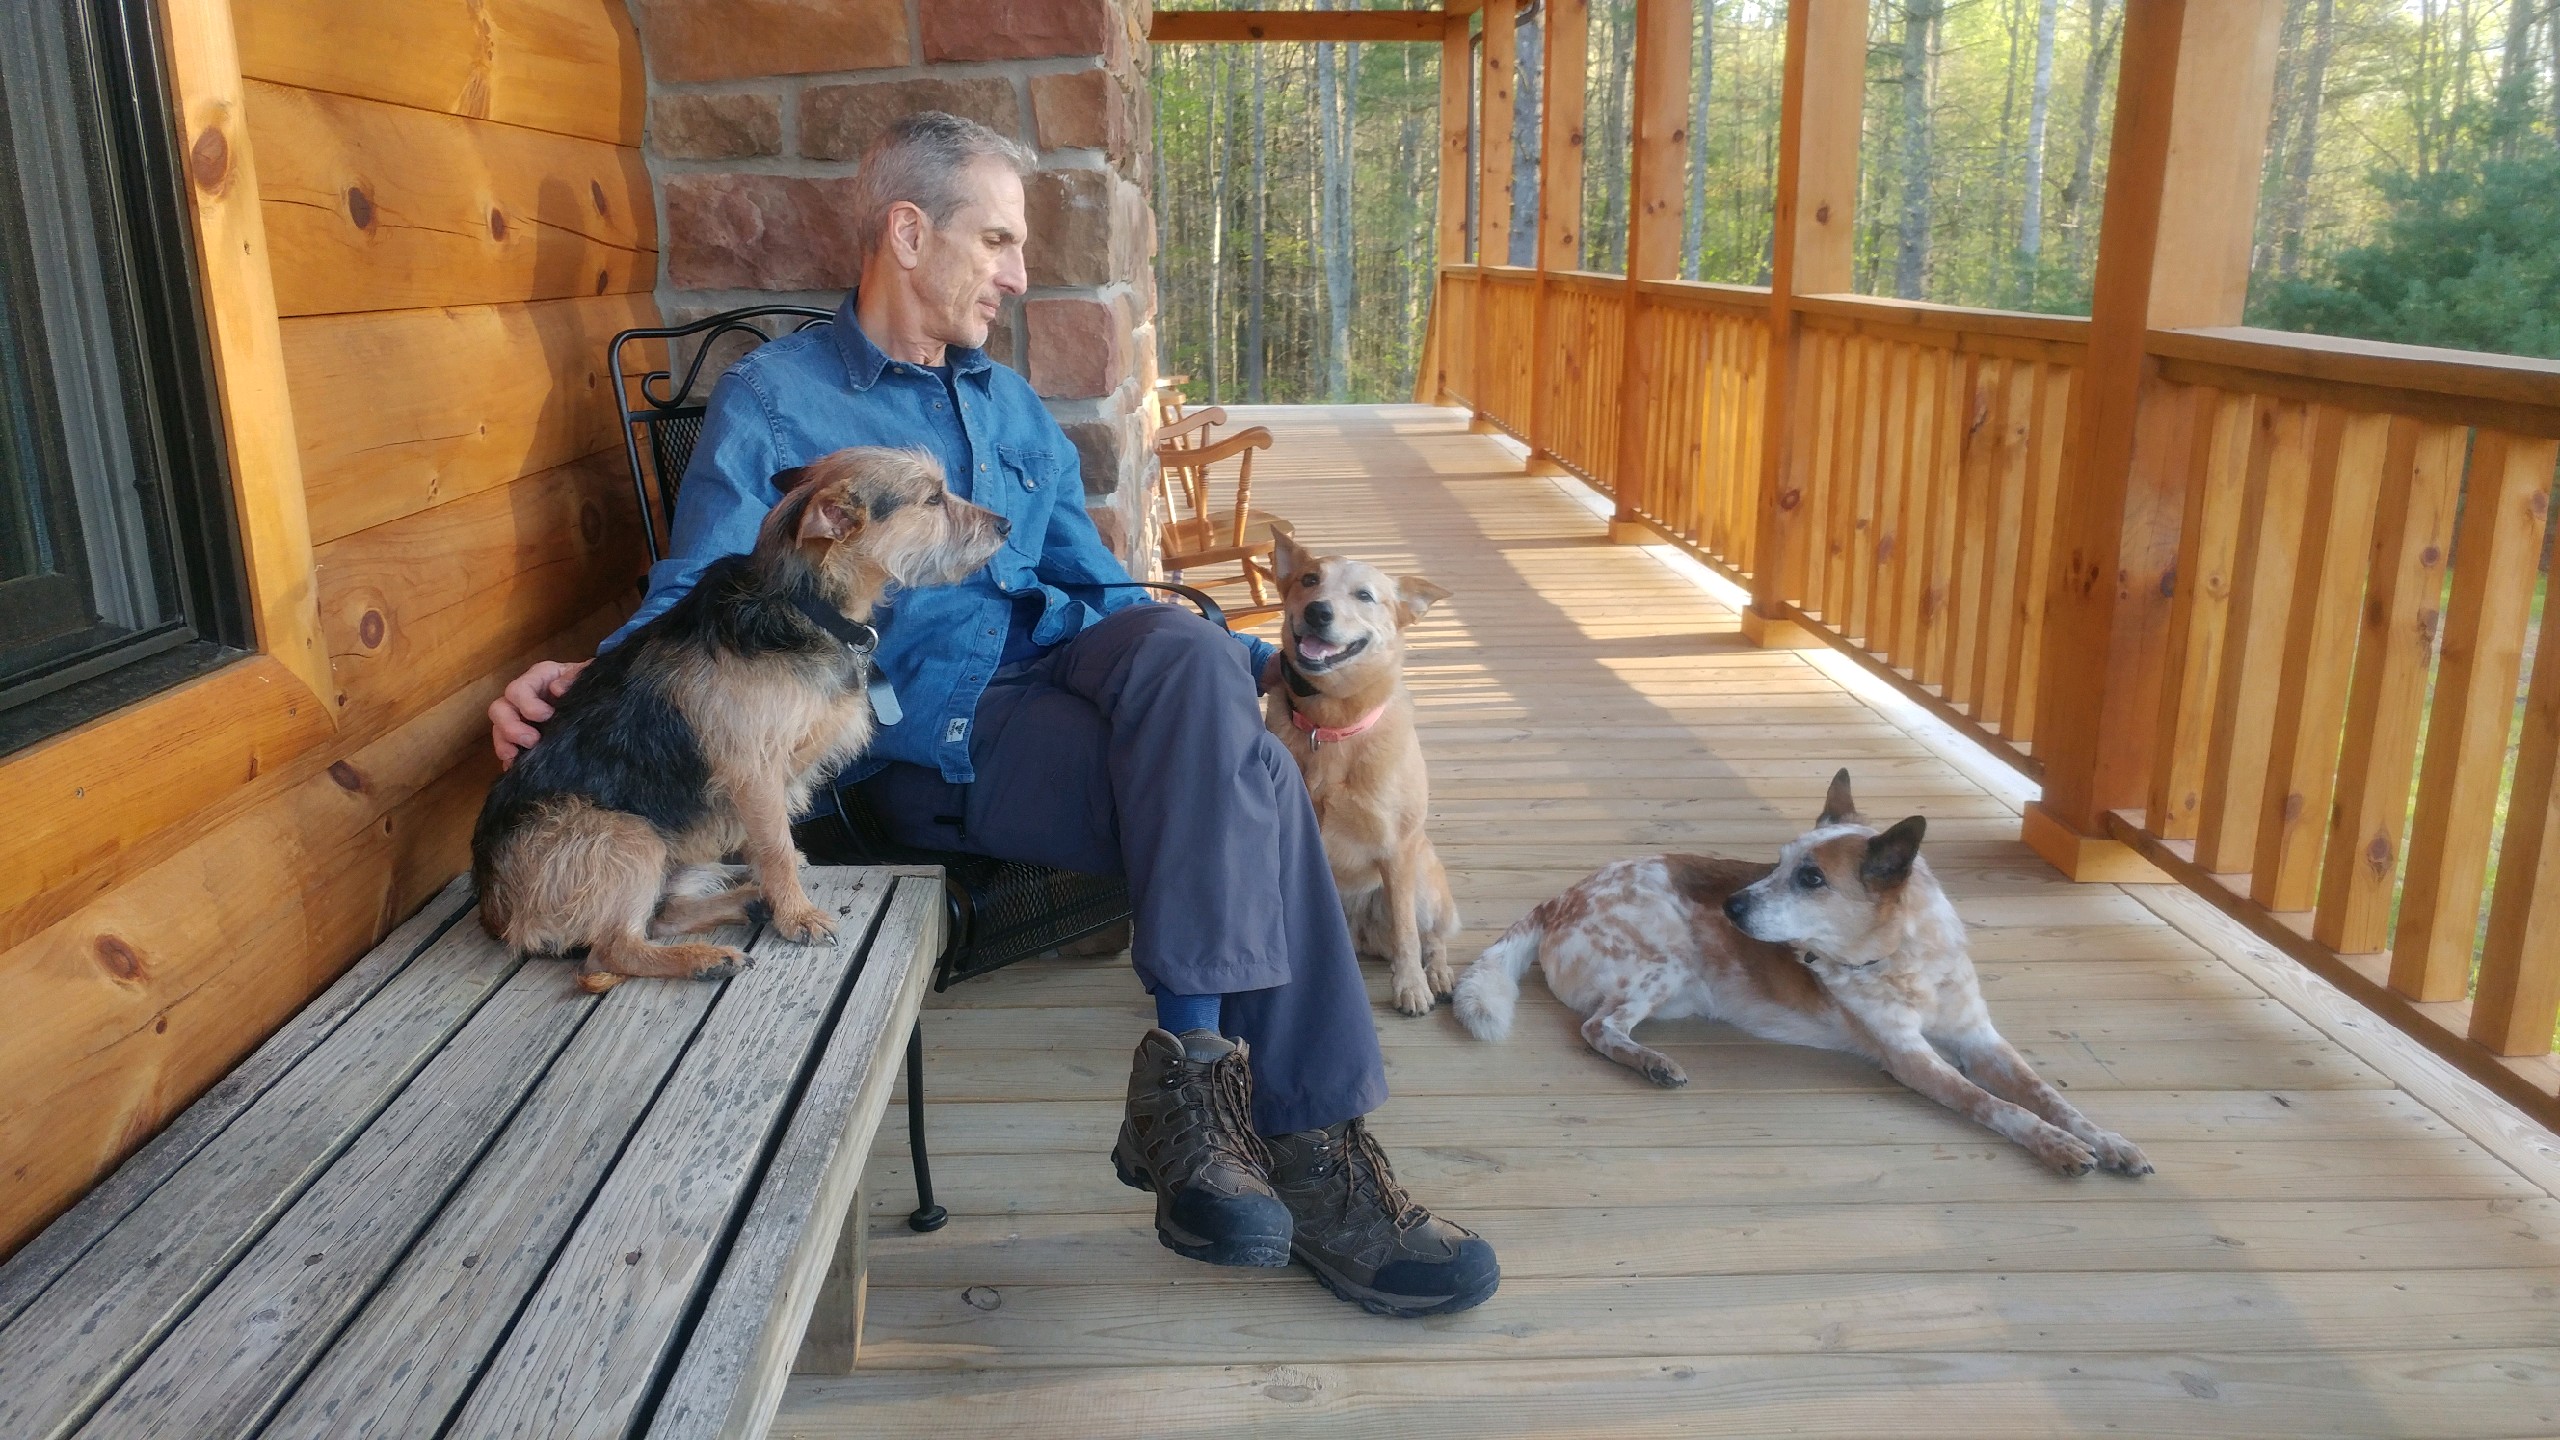 A pic of me &amp; dogs on porch_4.15.20